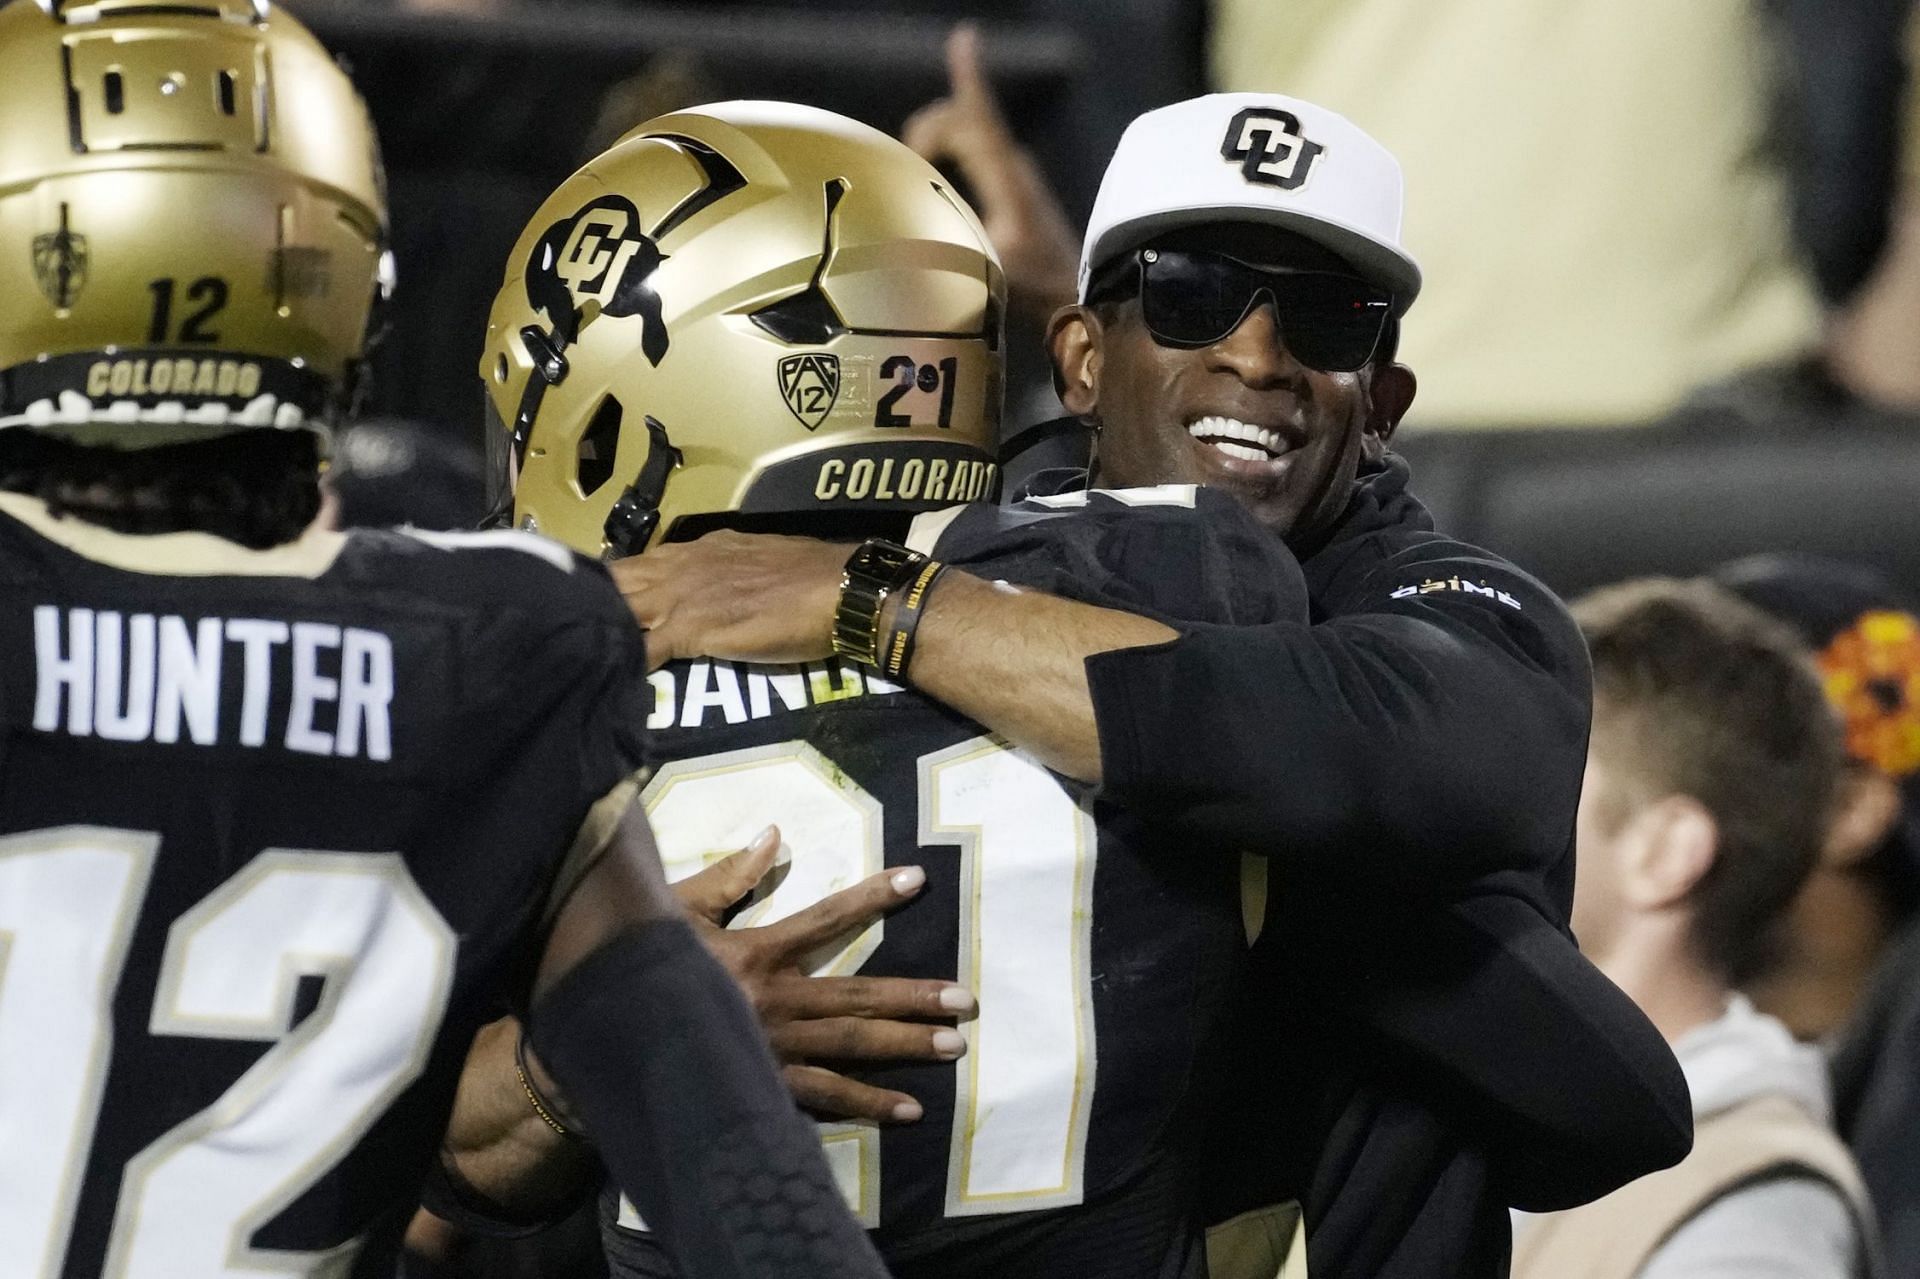 Colorado St Colorado Football: Colorado head coach, right, hugs his son, safety Shilo Sanders, after he returned an interception for a touchdown in the first half of an NCAA college football game against Colorado State Saturday, Sept. 16, 2023, in Boulder, Colo. (AP Photo/David Zalubowski)